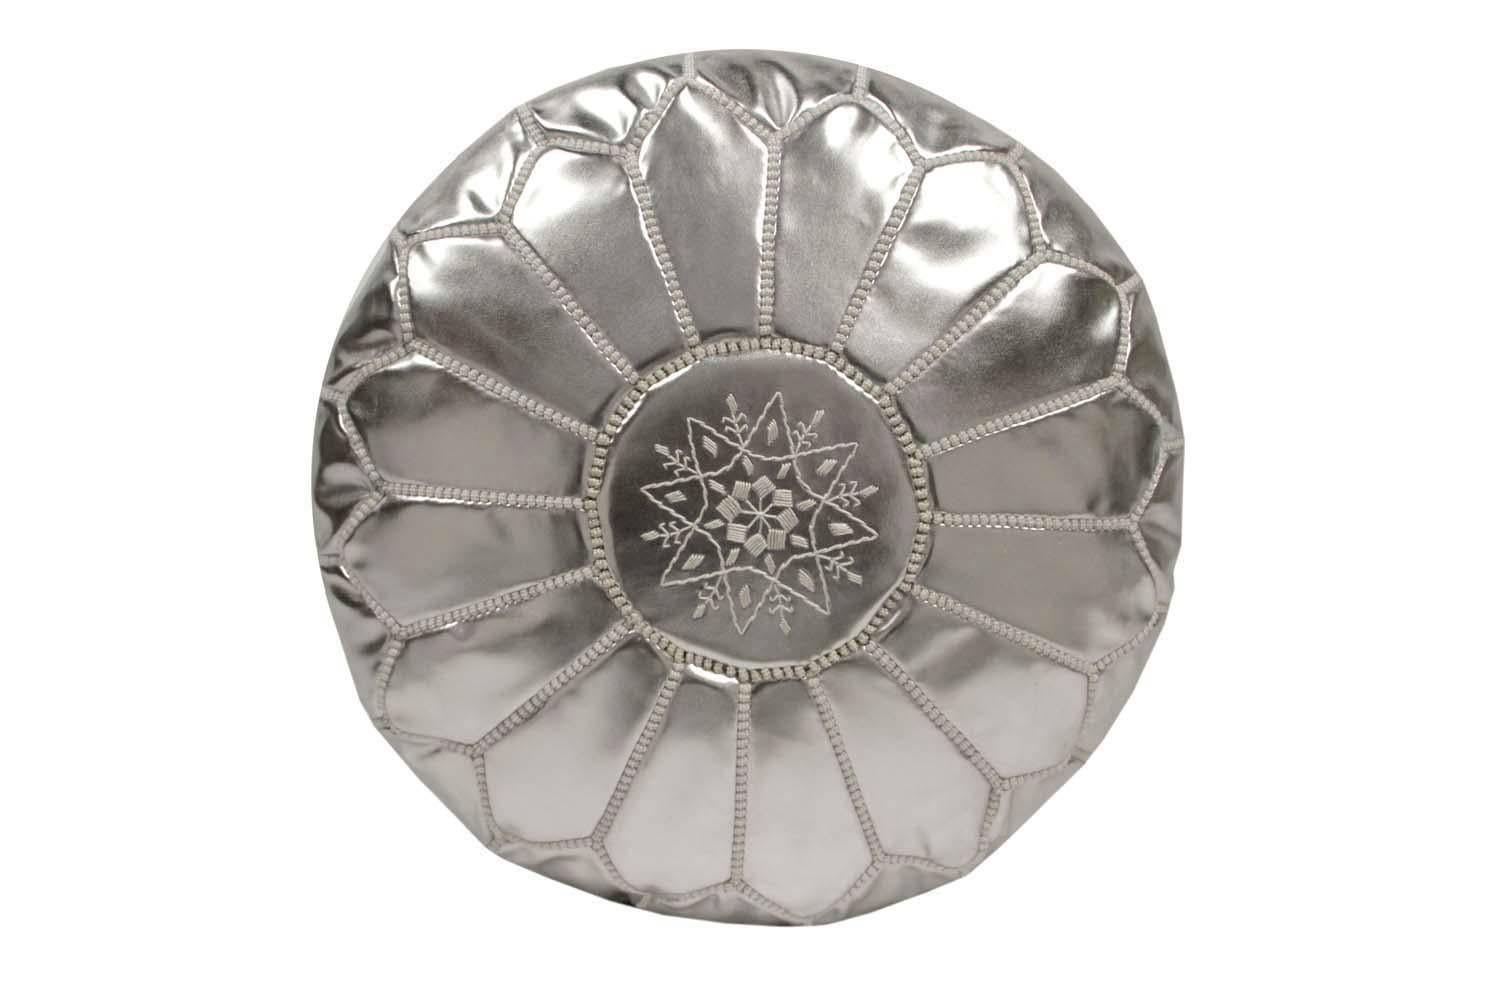 Moroccan silver metallic color round pouf hand tooled and embroidered in Marrakesh. 
Beautiful geometrical designs are hand-stitched on this Moroccan stool by expert Artisan. 
Use these round handcrafted poufs as ottoman or accent side table, they